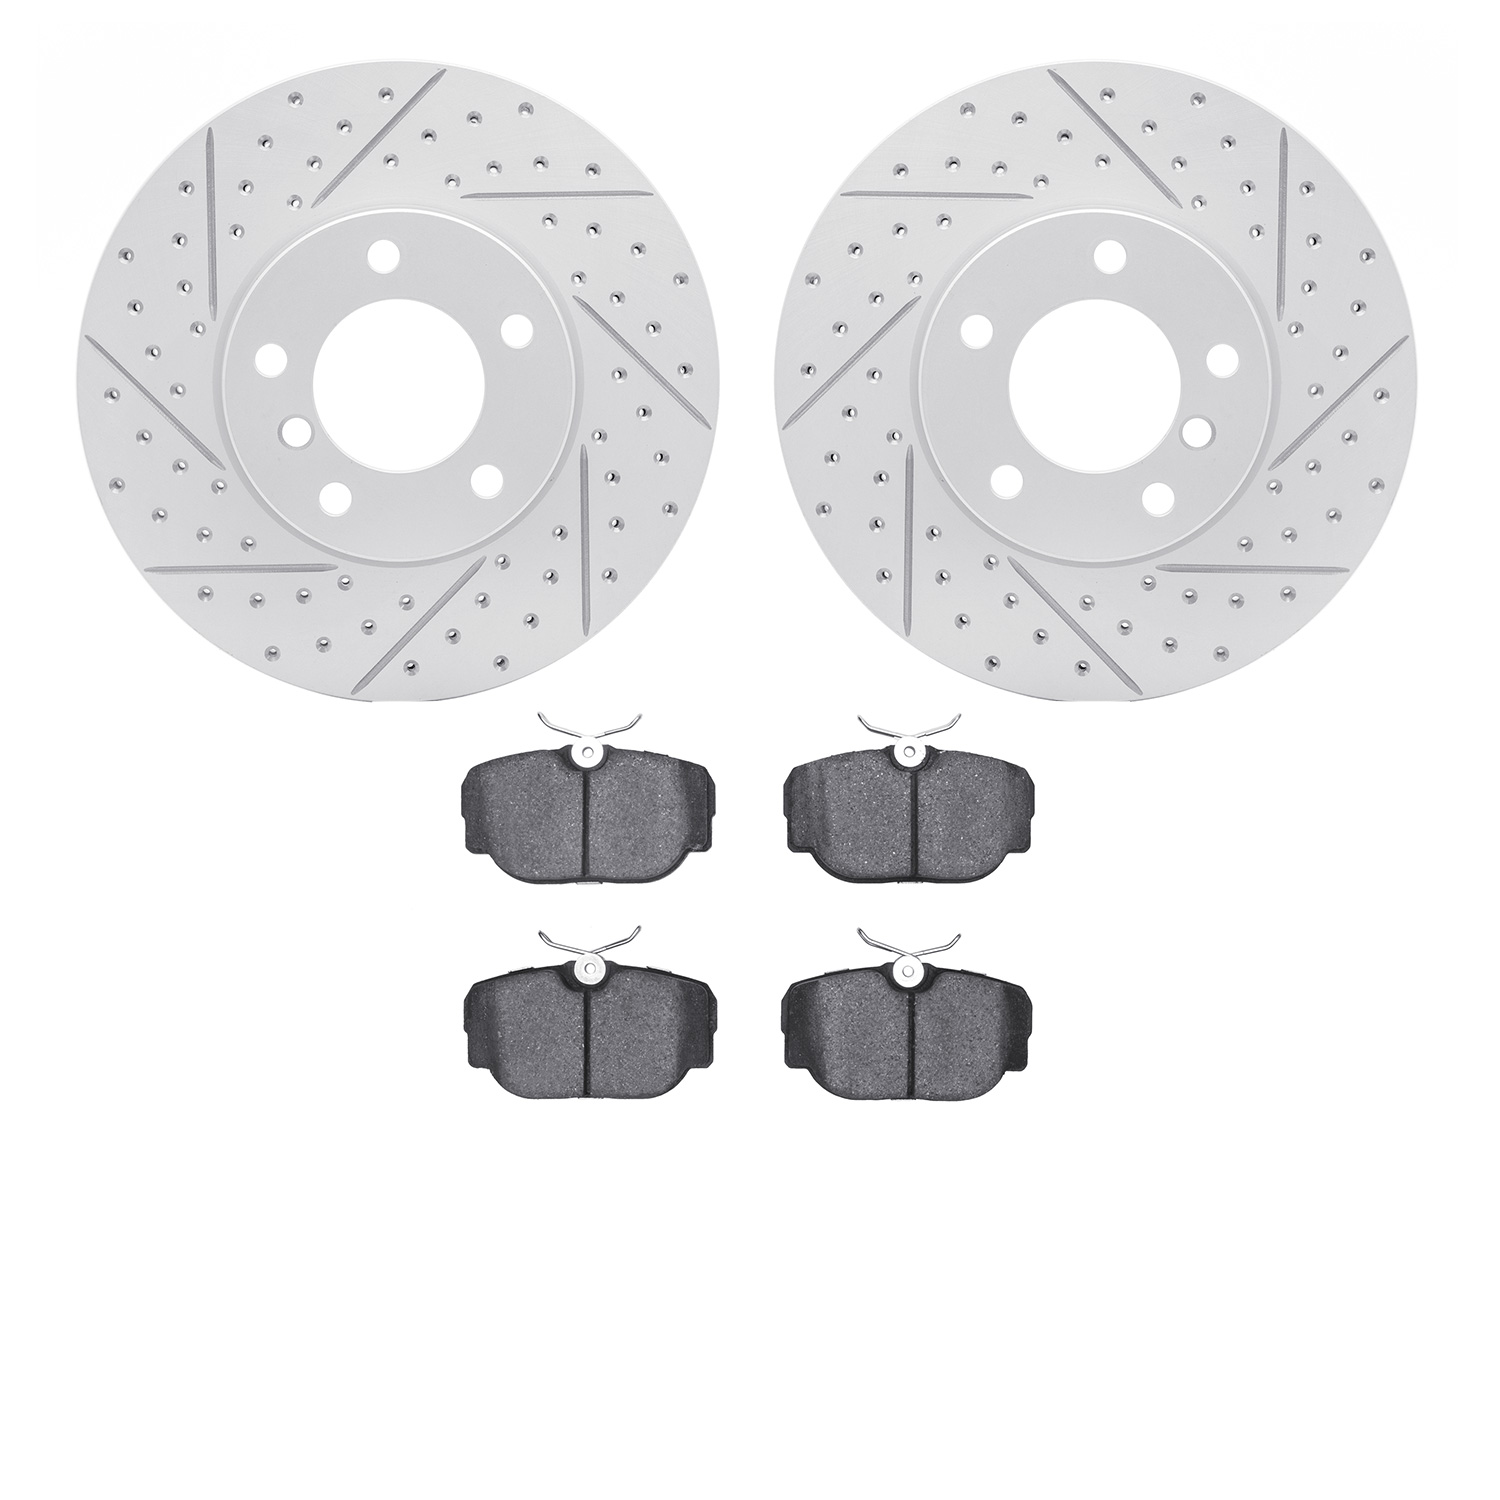 2502-31066 Geoperformance Drilled/Slotted Rotors w/5000 Advanced Brake Pads Kit, 2007-2013 BMW, Position: Front